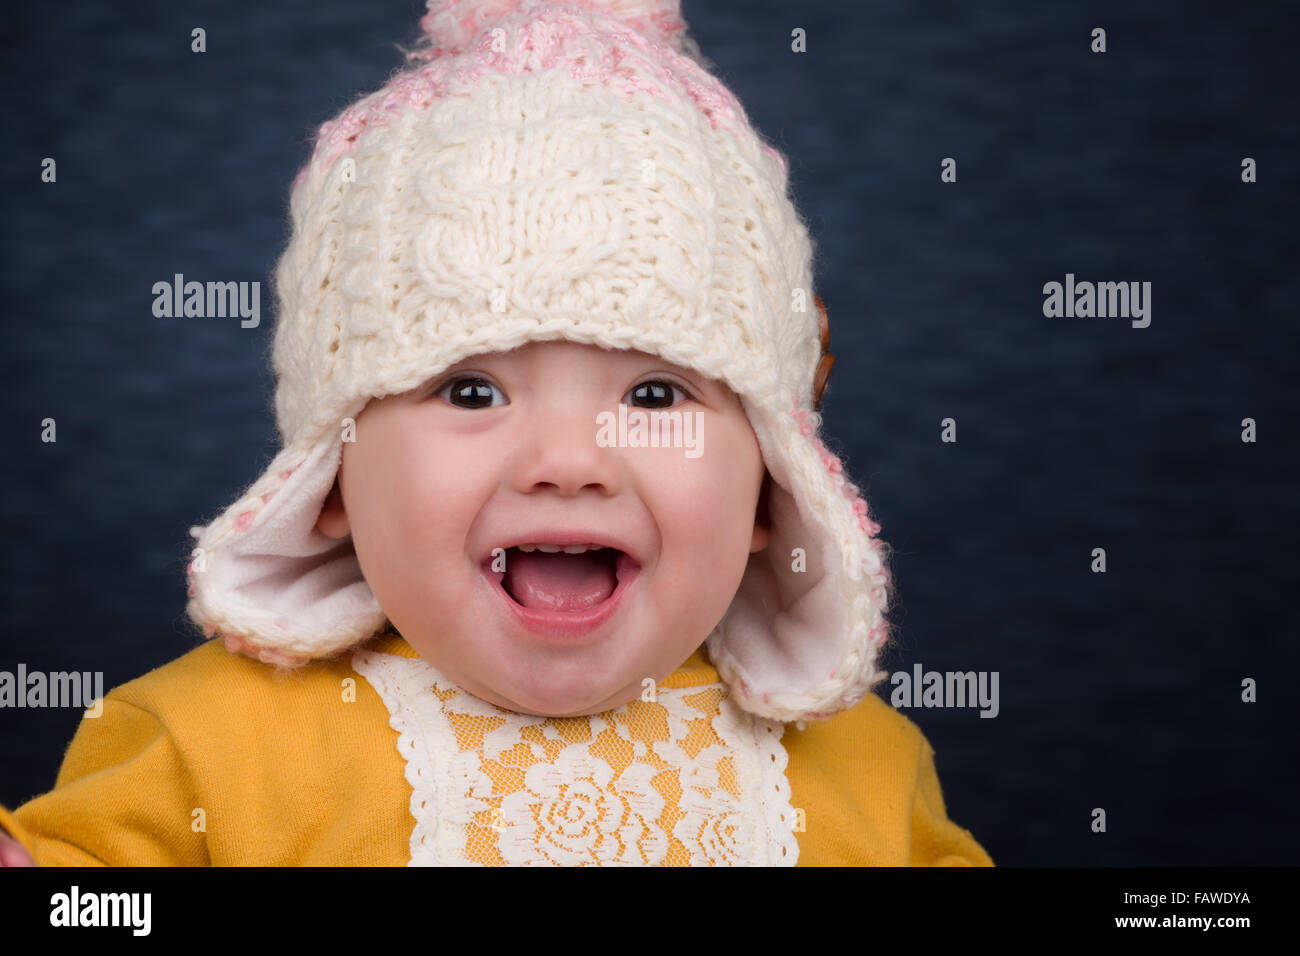 A smiling baby girl wearing a knit winter hat. Stock Photo